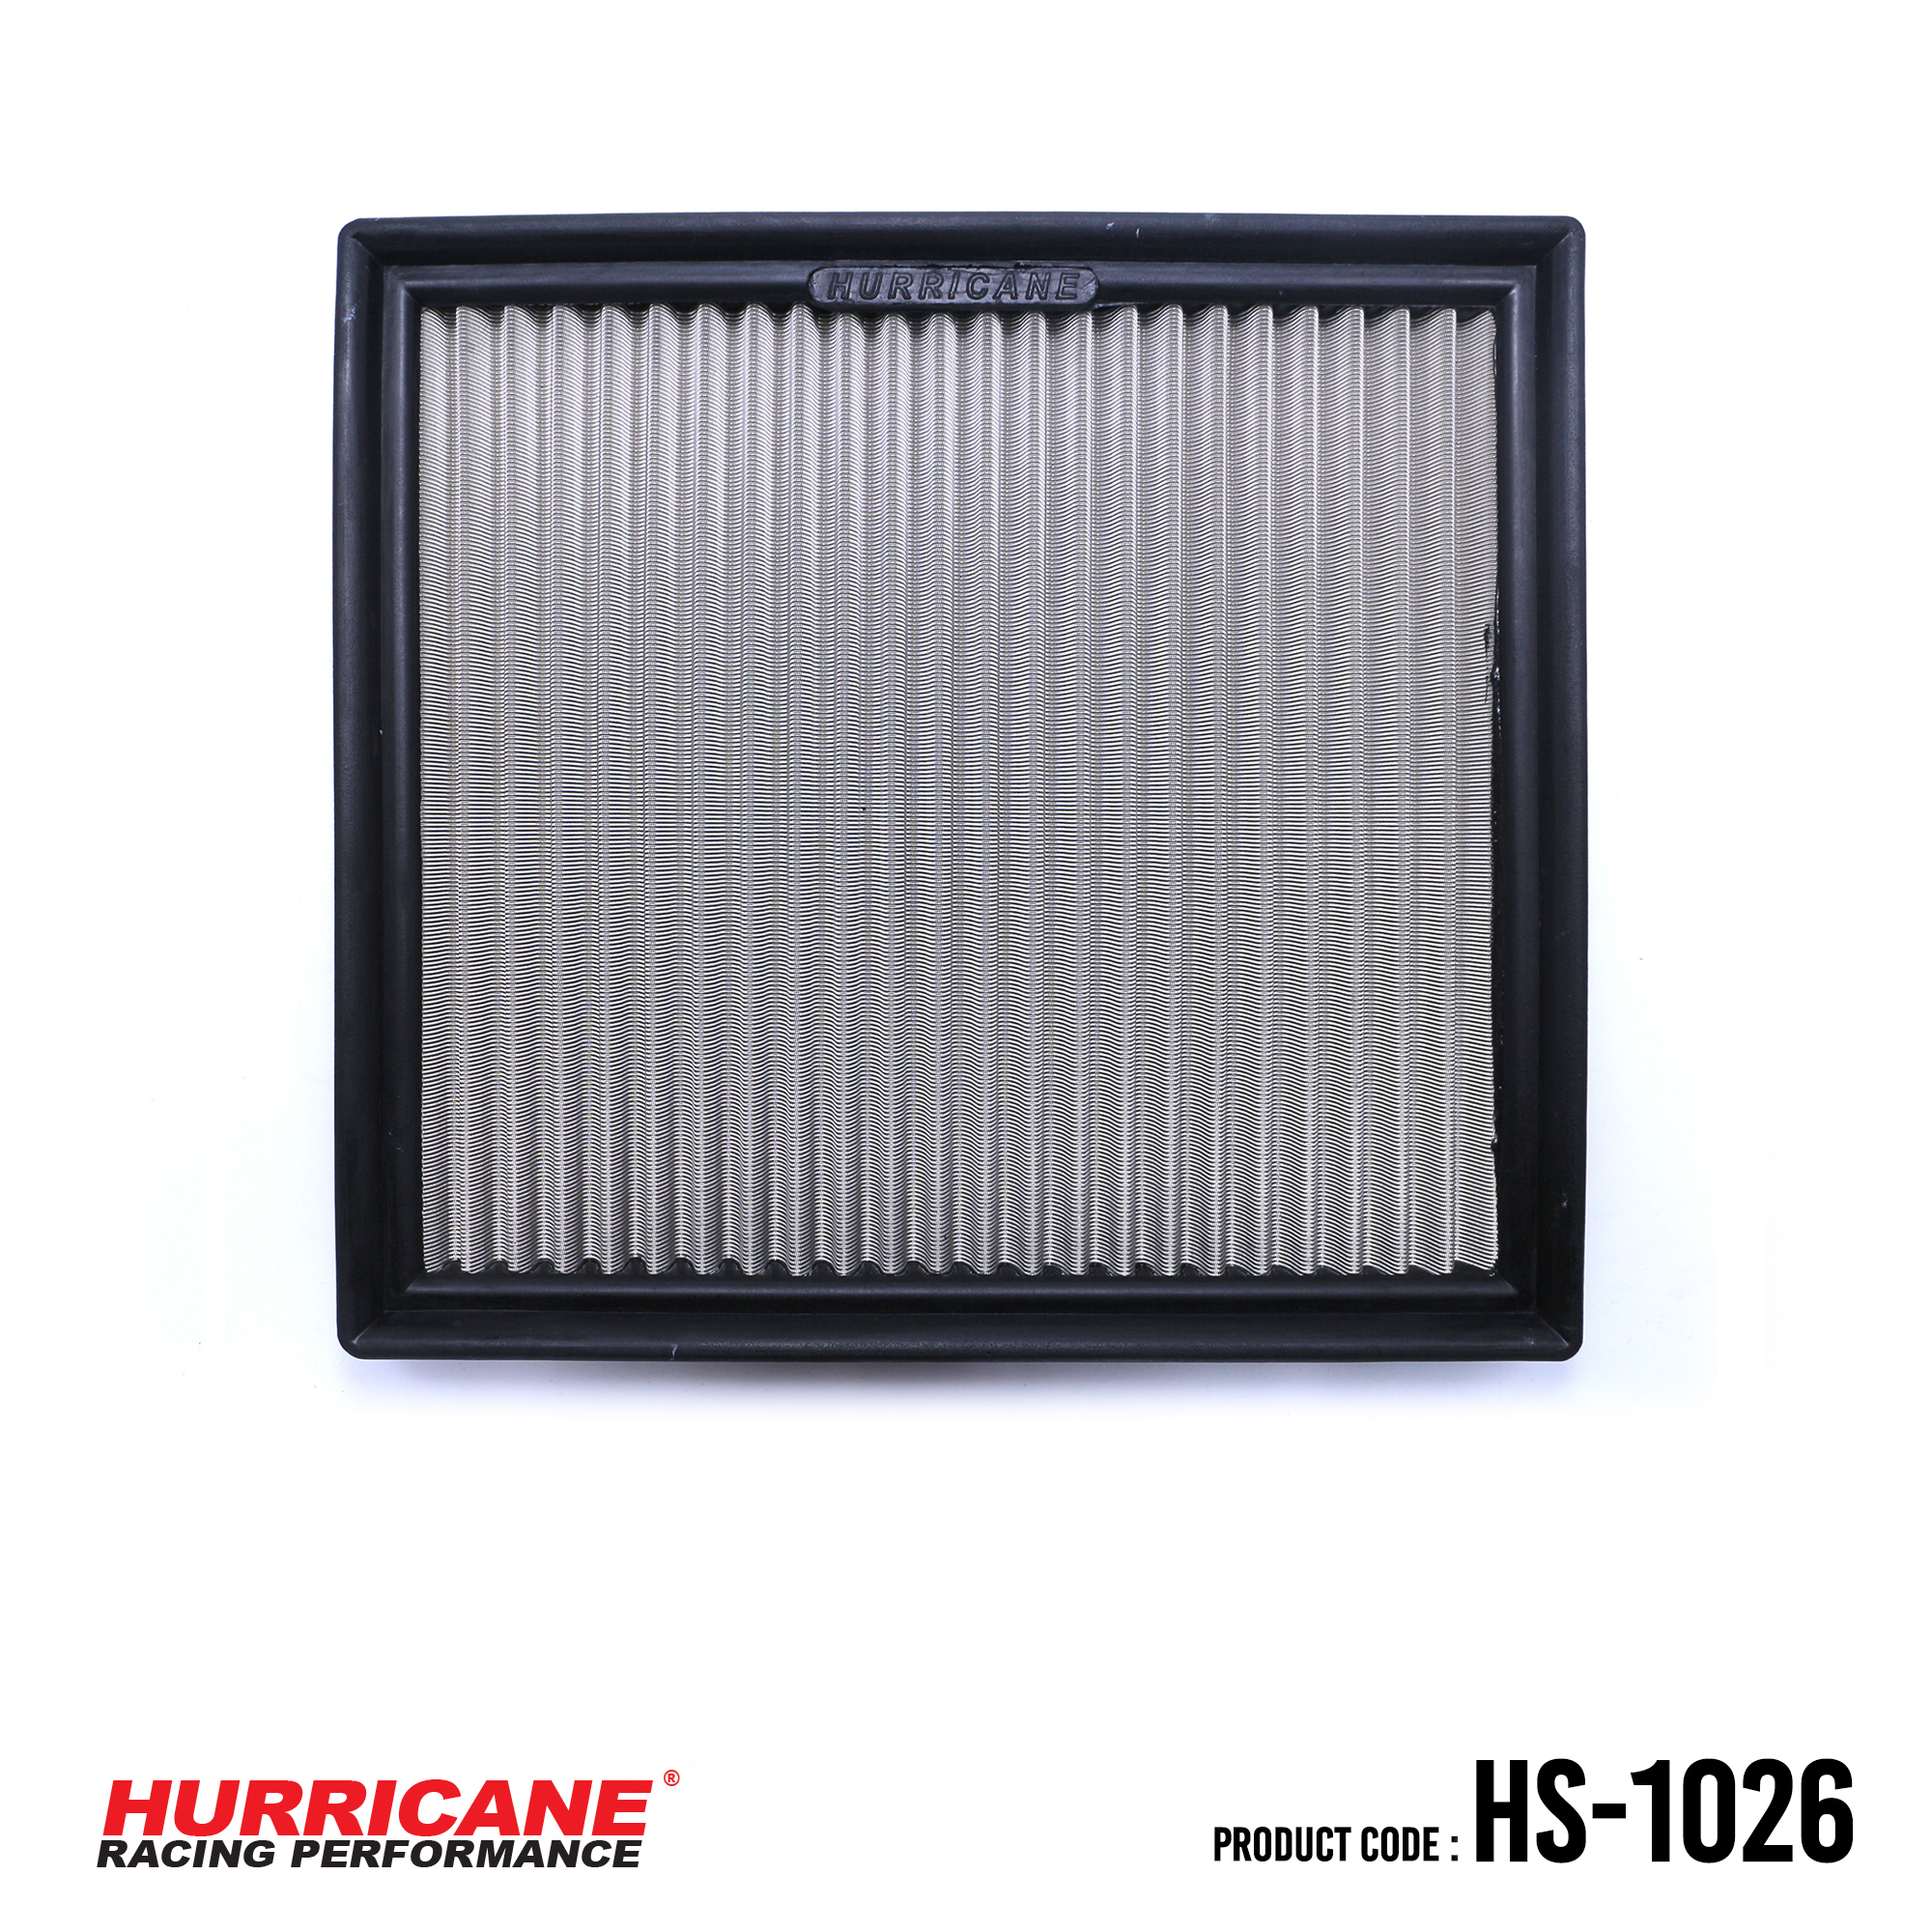 HURRICANE STAINLESS STEEL AIR FILTER FOR HS-1026 Mitsubishi